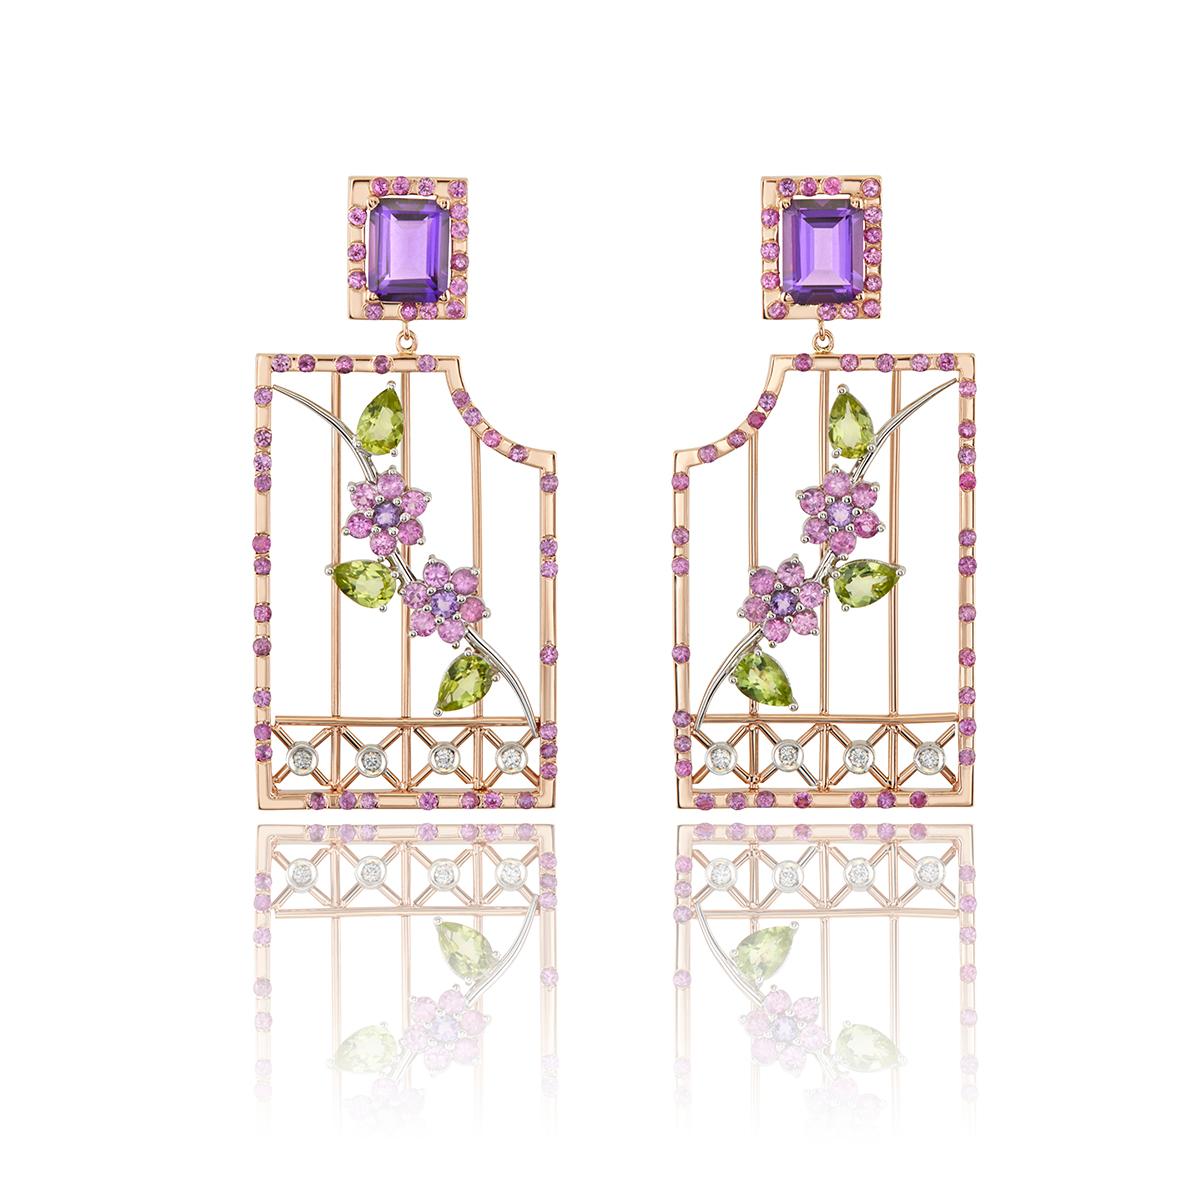 Earrings,  18Kt  yellow gold  with mixed stones such as  Amethyst, Rubies, Peridot and Diamonds brilliant cut. 
It is a statement pair of earrings that it will win your admiring glances at once. 
This jewelry piece belongs to Metalloplasies